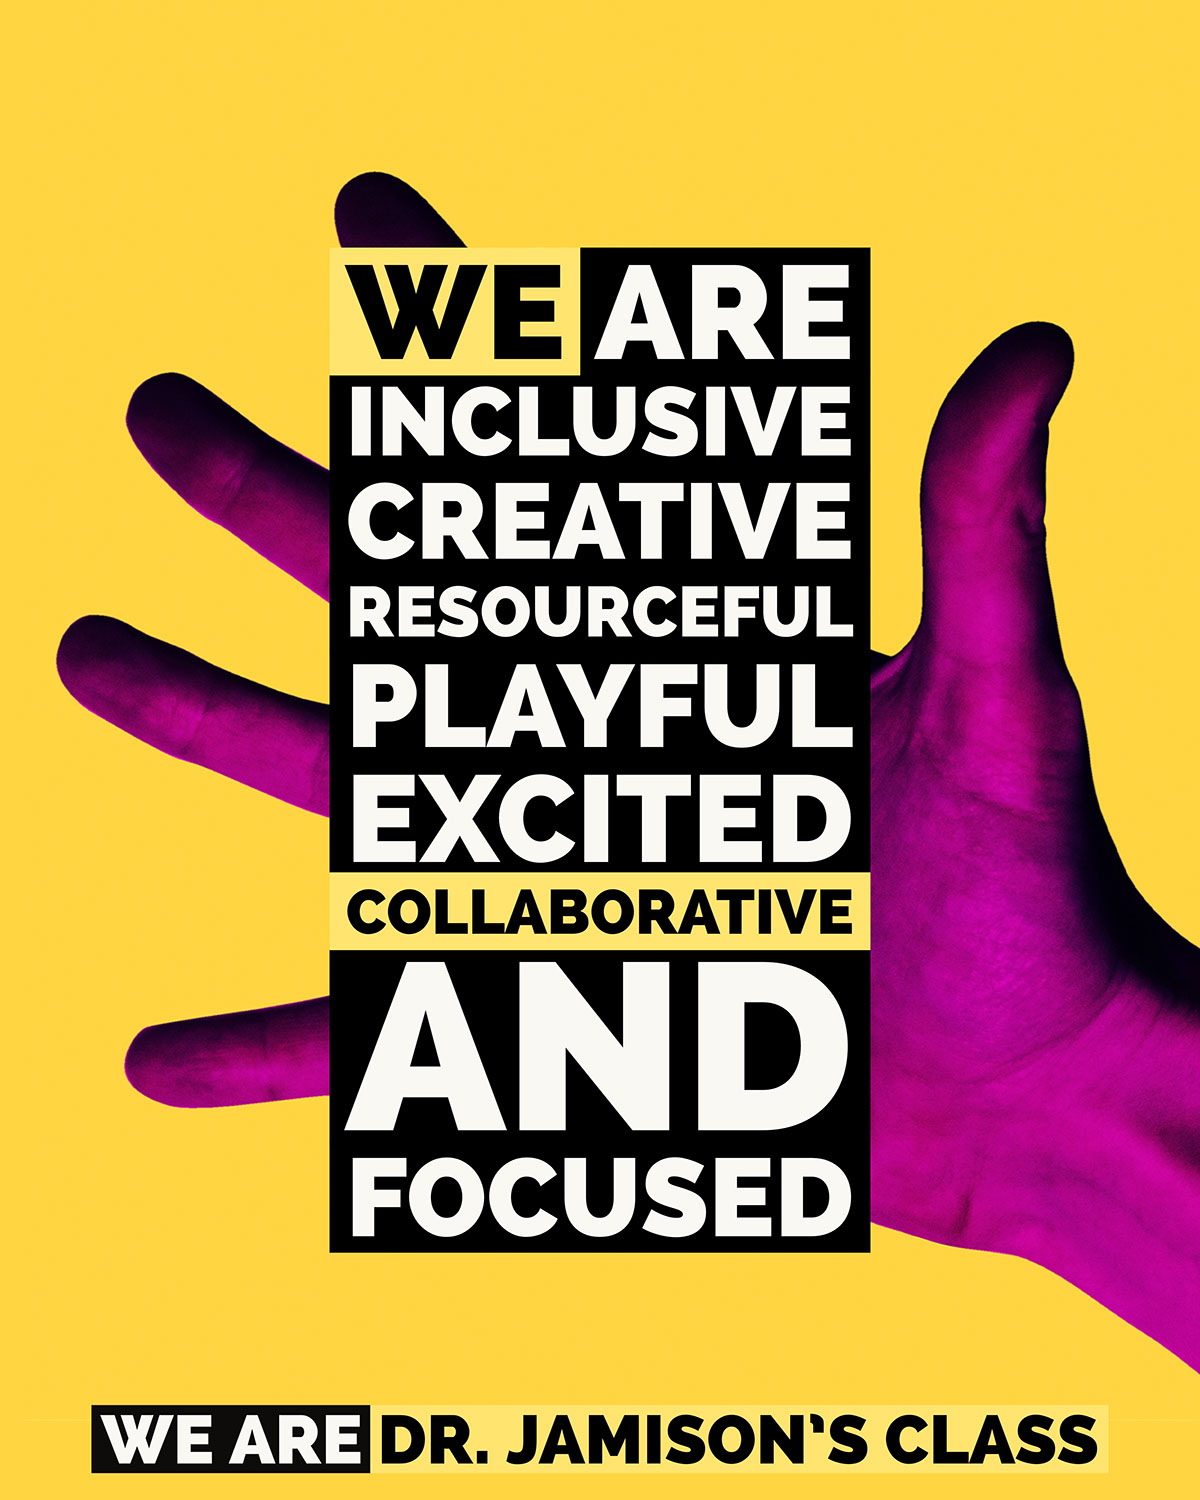 WE ARE INCLUSIVE CREATIVE RESOURCEFUL PLAYFUL EXCITED COLLABORATIVE and FOCUSED WE ARE INCLUSIVE CREATIVE RESOURCEFUL PLAYFUL EXCITED COLLABORATIVE and FOCUSED WE ARE DR. JAMISON’S CLASS